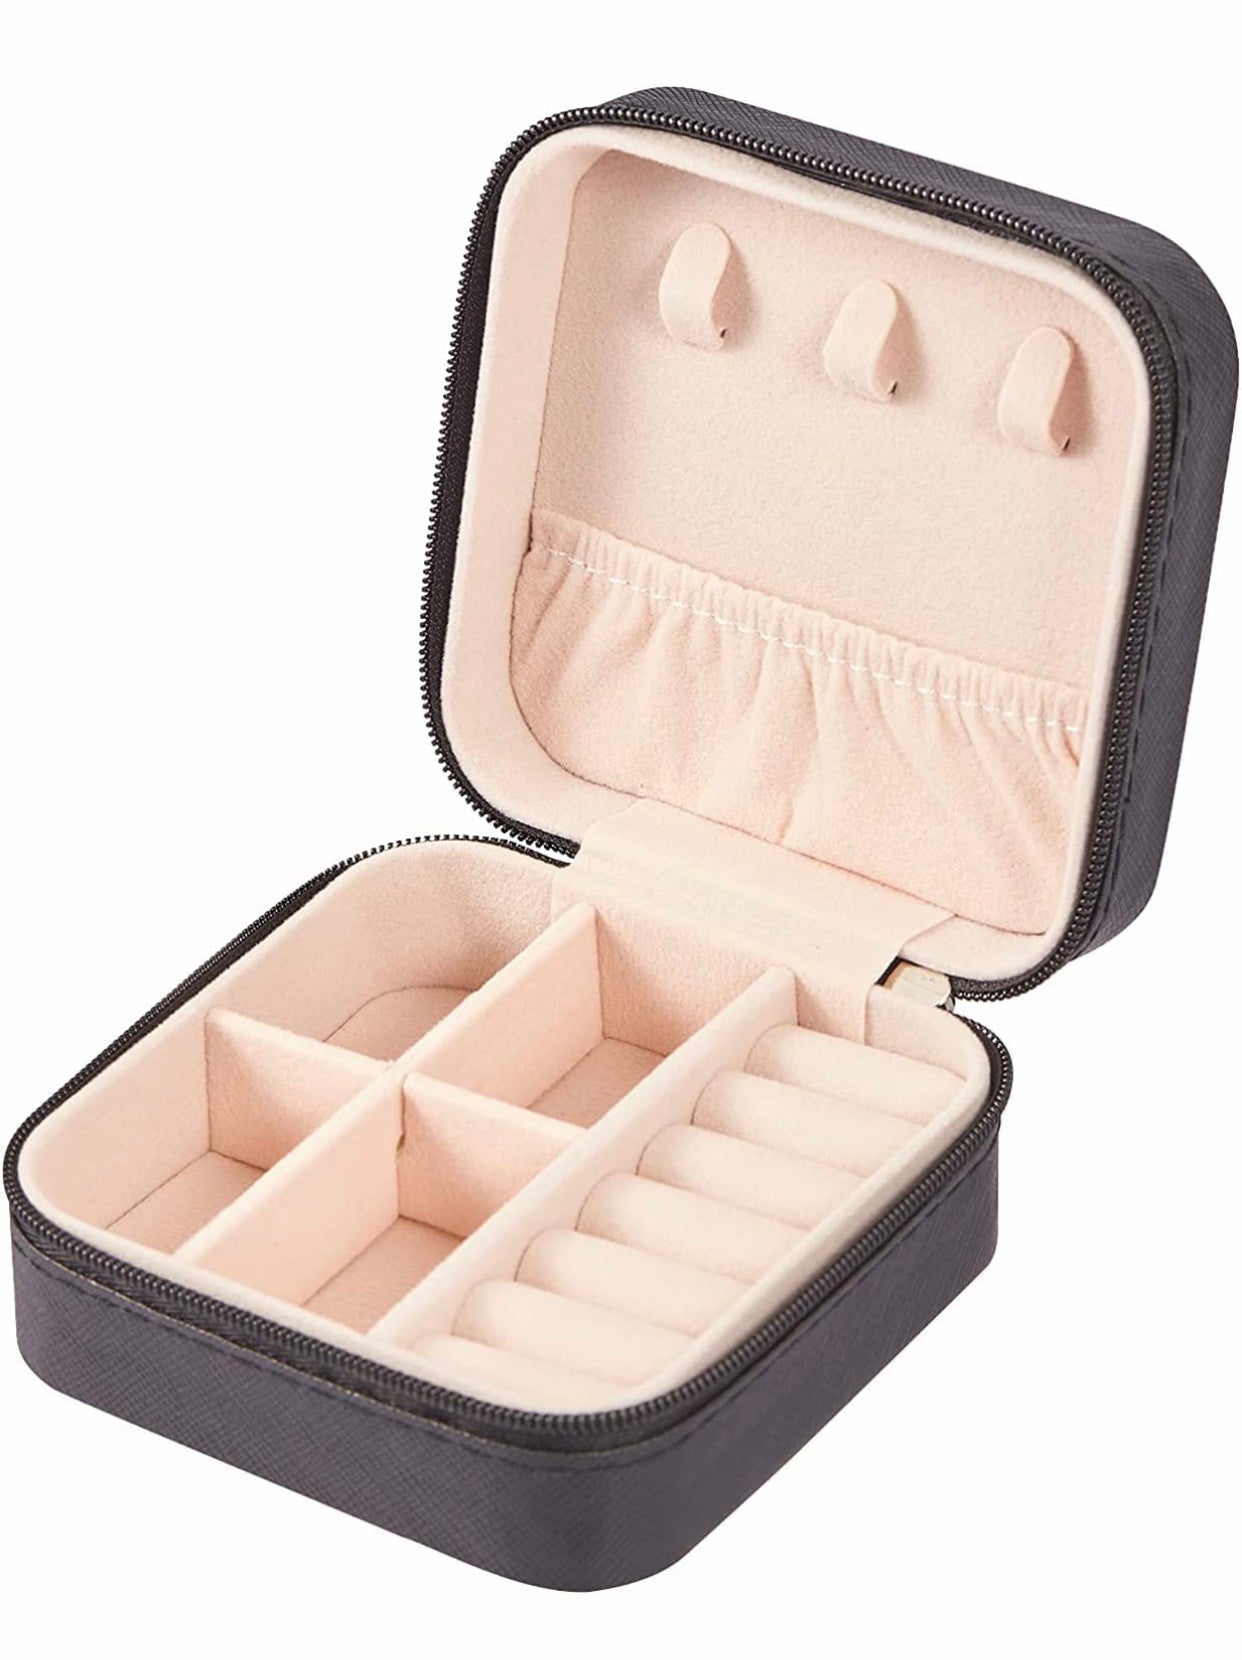 Let your jewelry accompany you safely with our Faux leather jewelry box